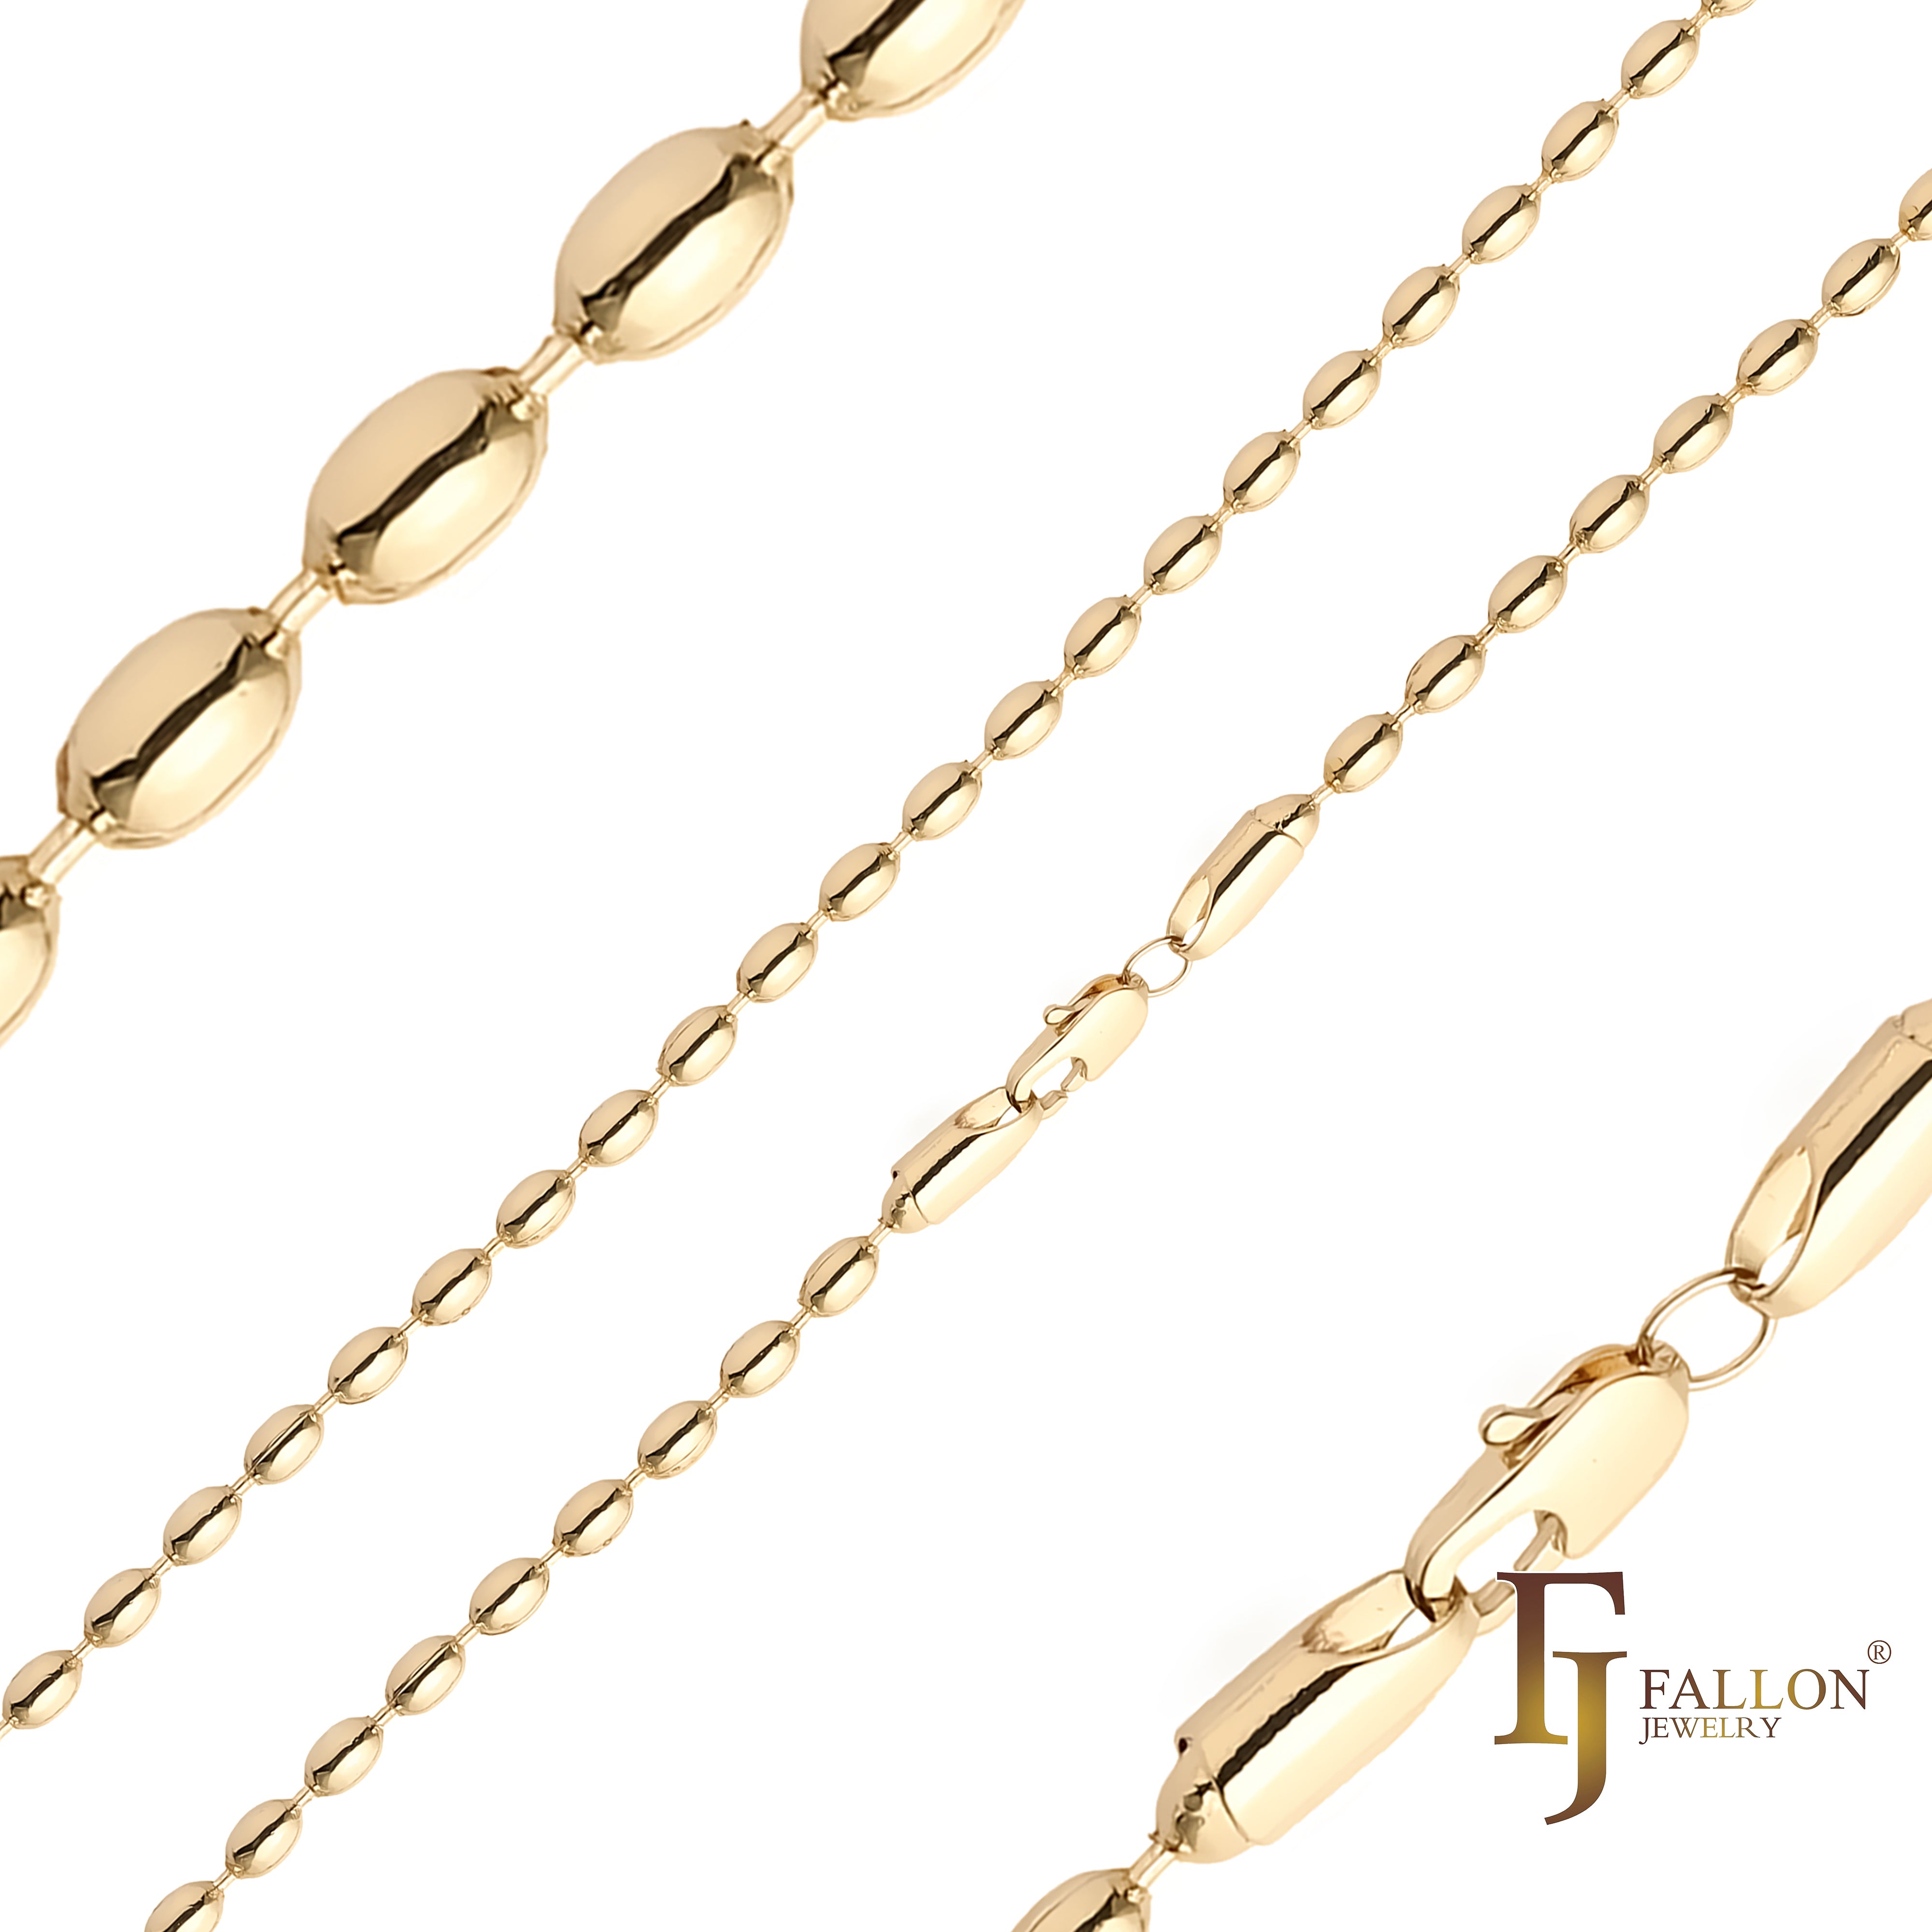 Beads chains plated in 14K Gold